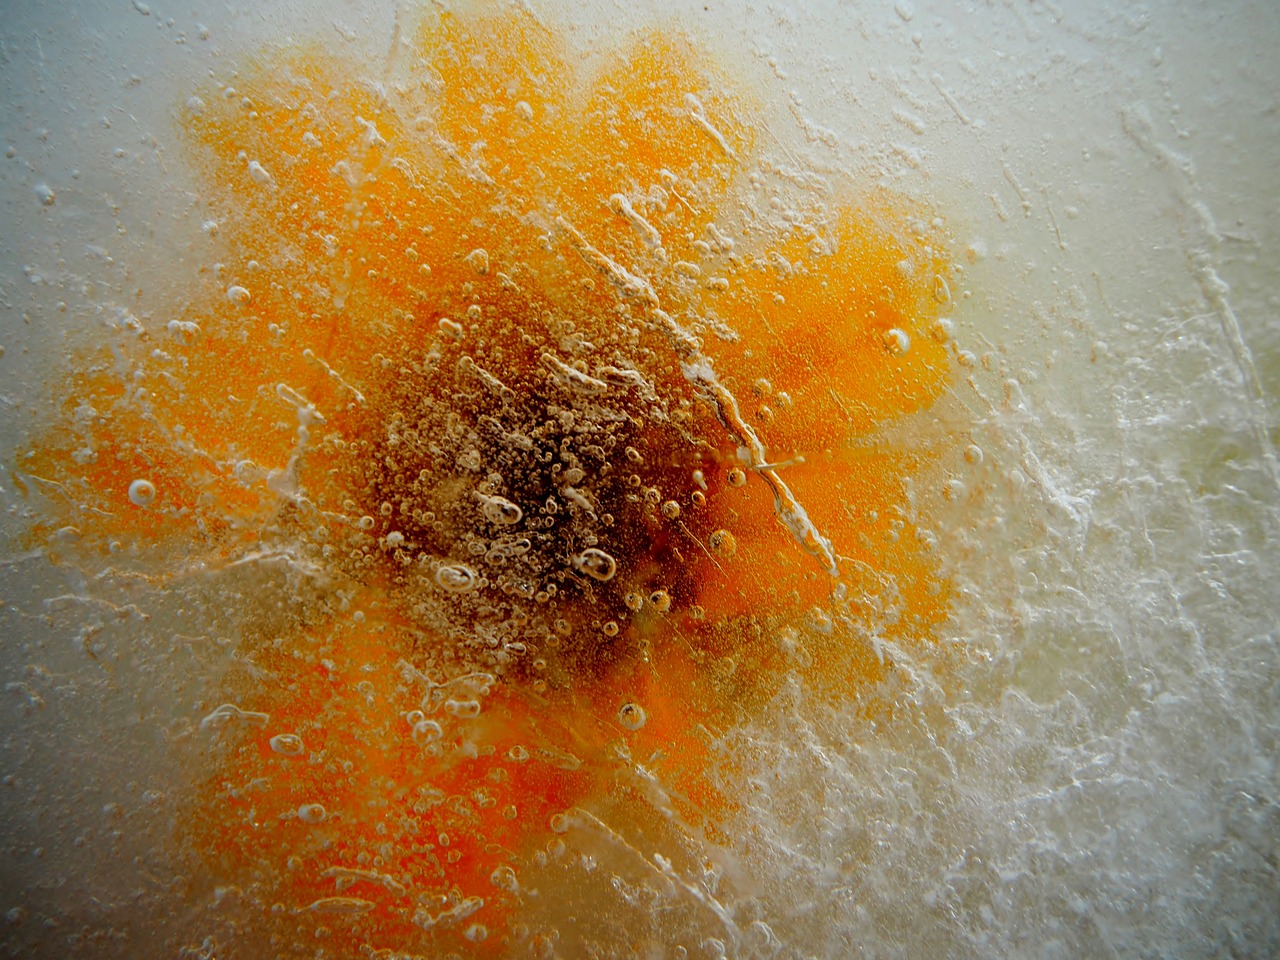 an orange flower is sprinkled with water, a microscopic photo, inspired by Helen Frankenthaler, flickr, process art, ice sunflowers, cai guo-qiang, cake, effervescent